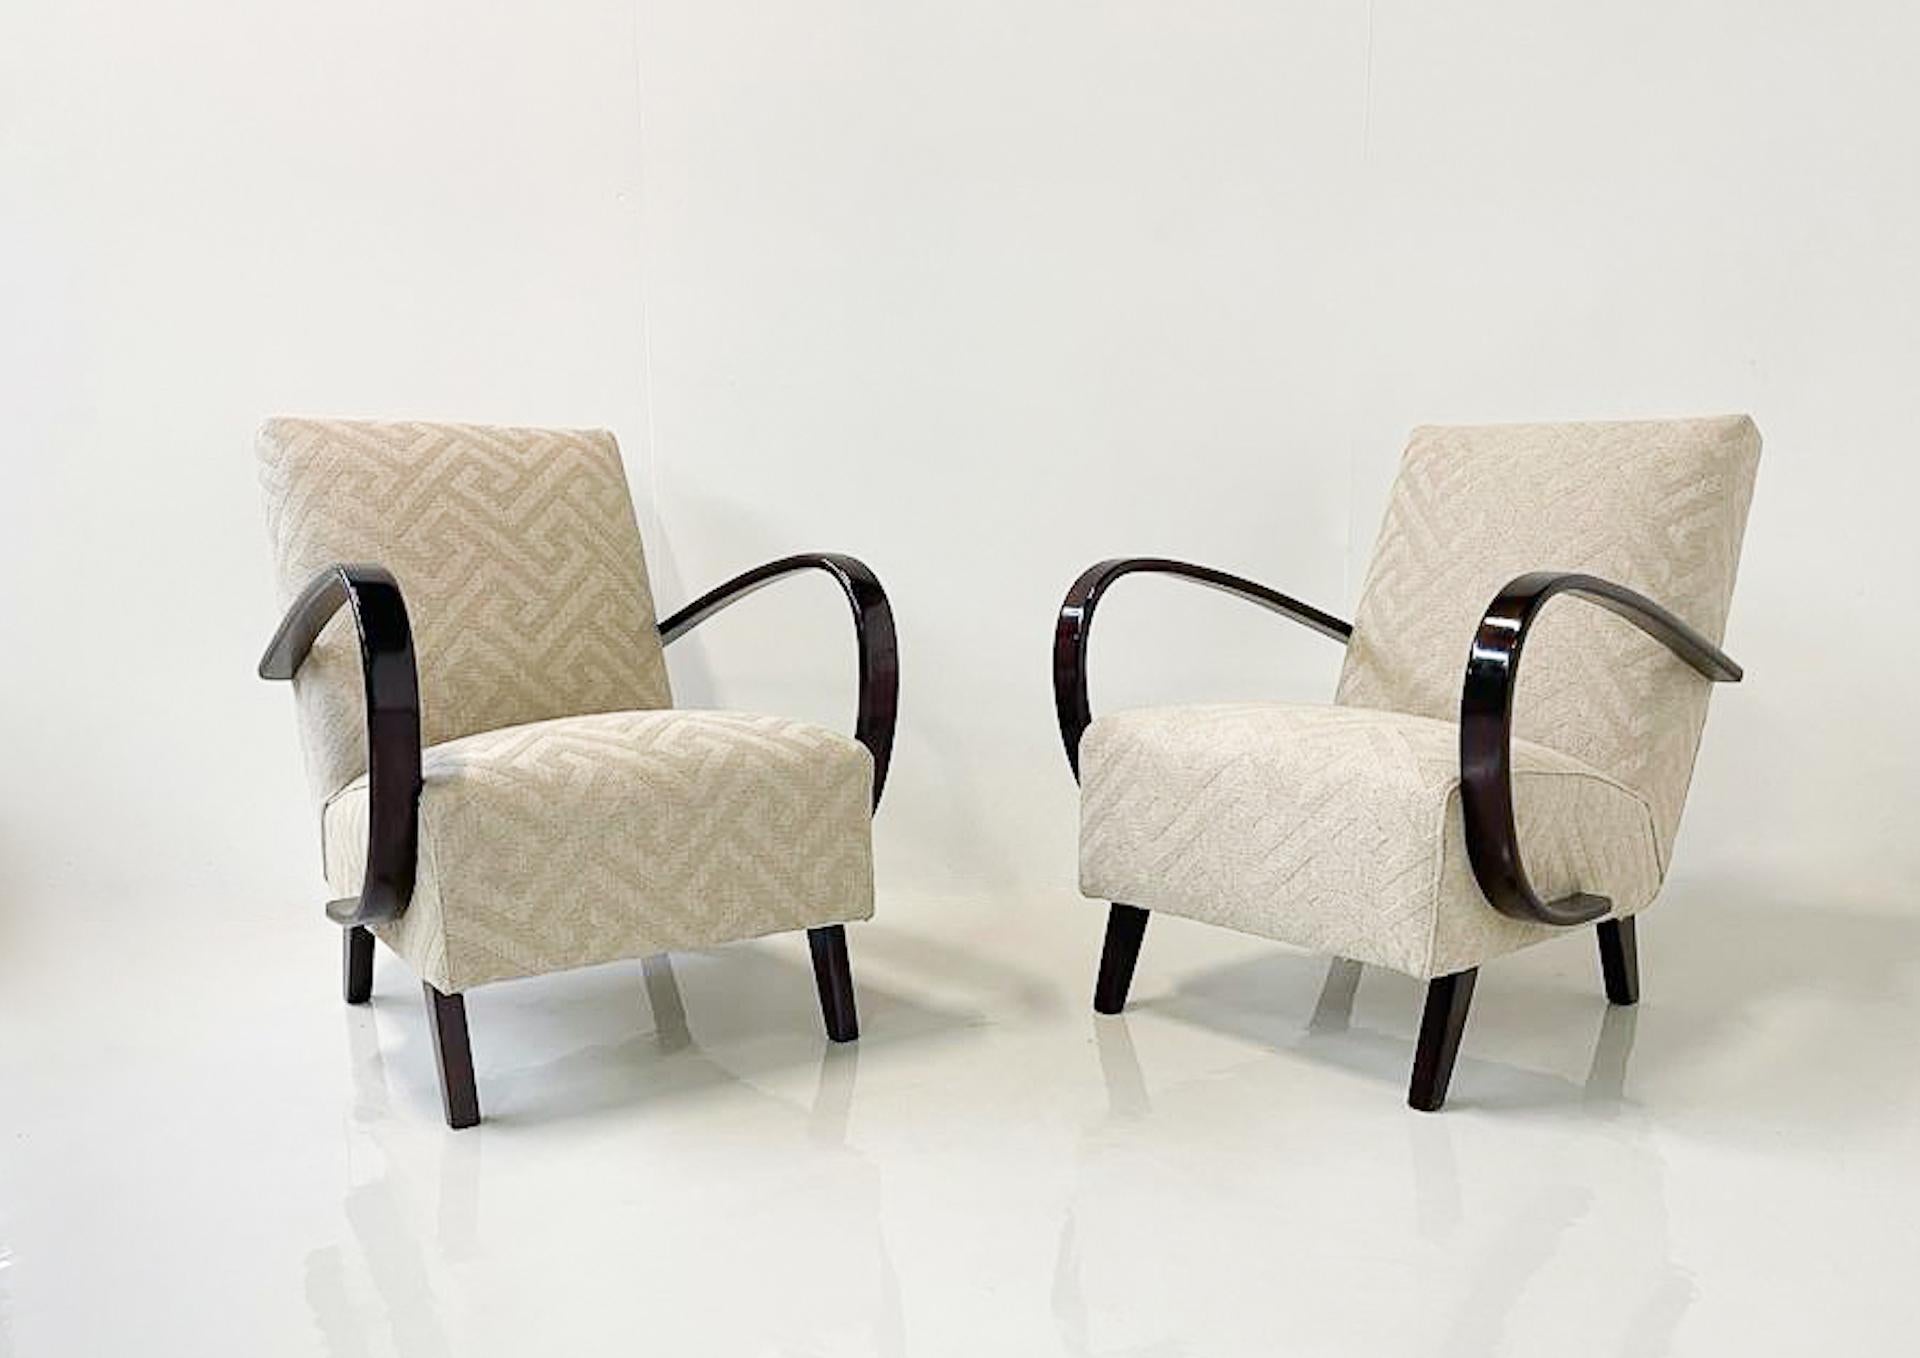 Mid-20th Century Pair of Bentwood Armchairs by Jindrich Halabala - Czech Republic 1940s For Sale